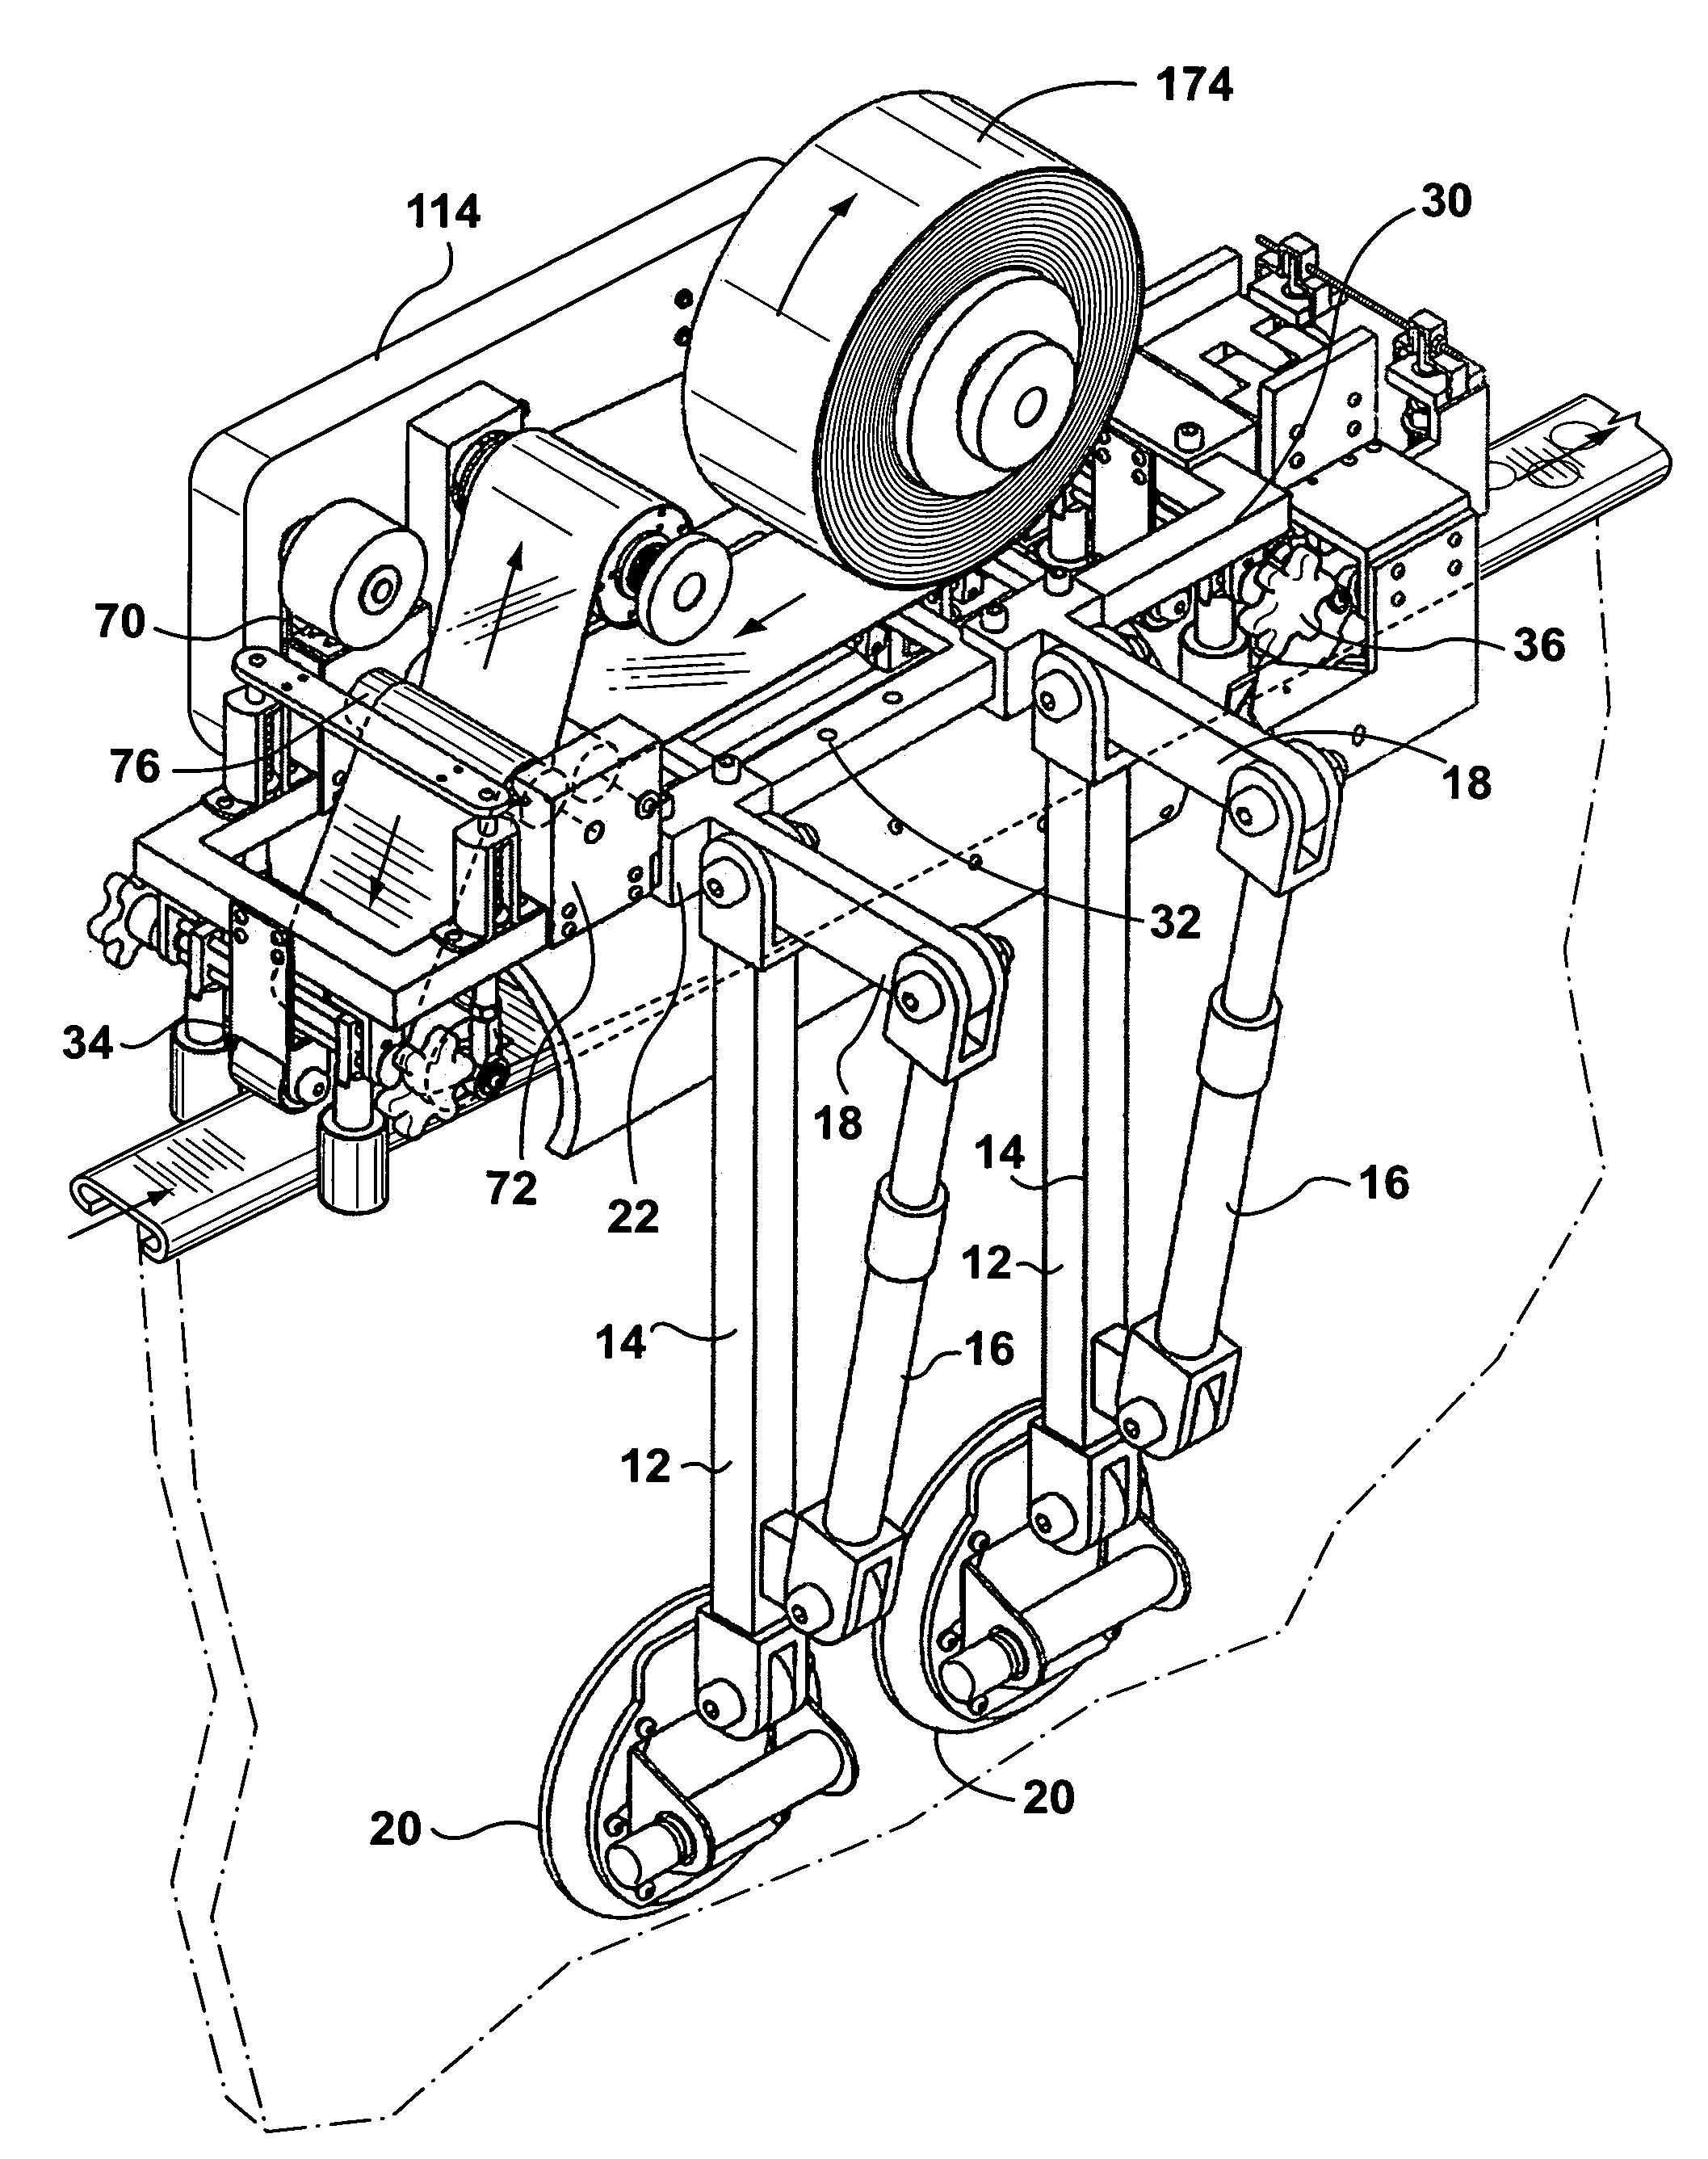 Method of and apparatus for applying a film optionally including advertising or other visible material, to the surface of a handrail for an escalator or moving walkway